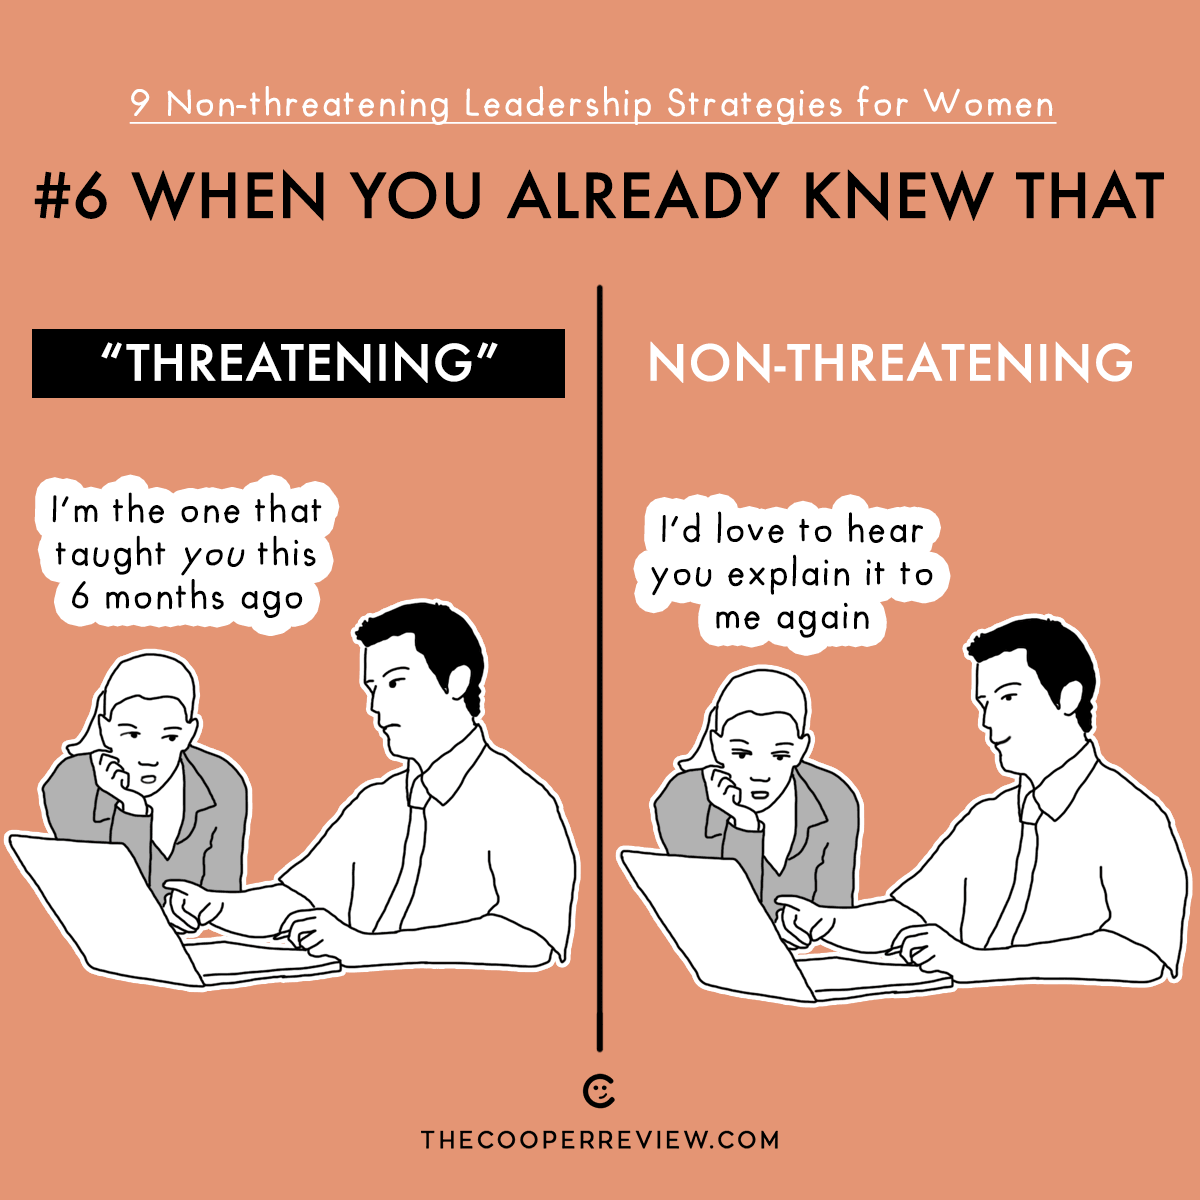 #6 When You Already Knew That. Threatening: I'm the one that taught you this 6 months ago. Non-threatening: I'd love to hear you explain it to me again.